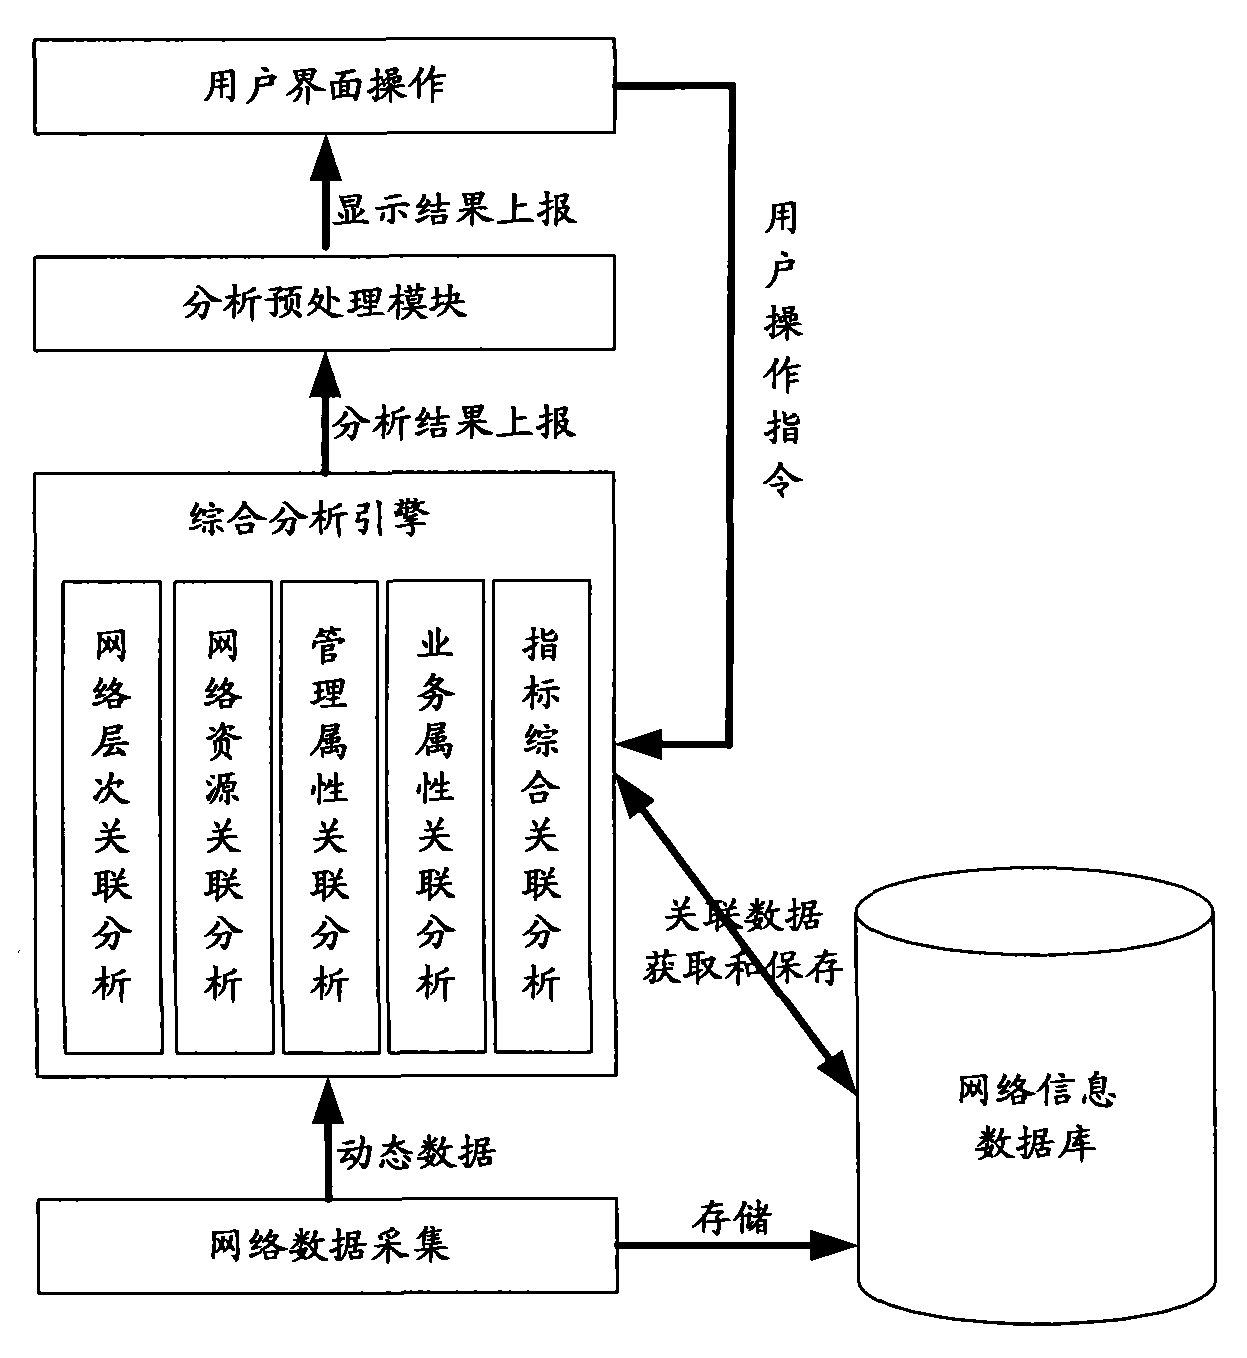 Multidimensional comprehensive situation display system based on degree of association